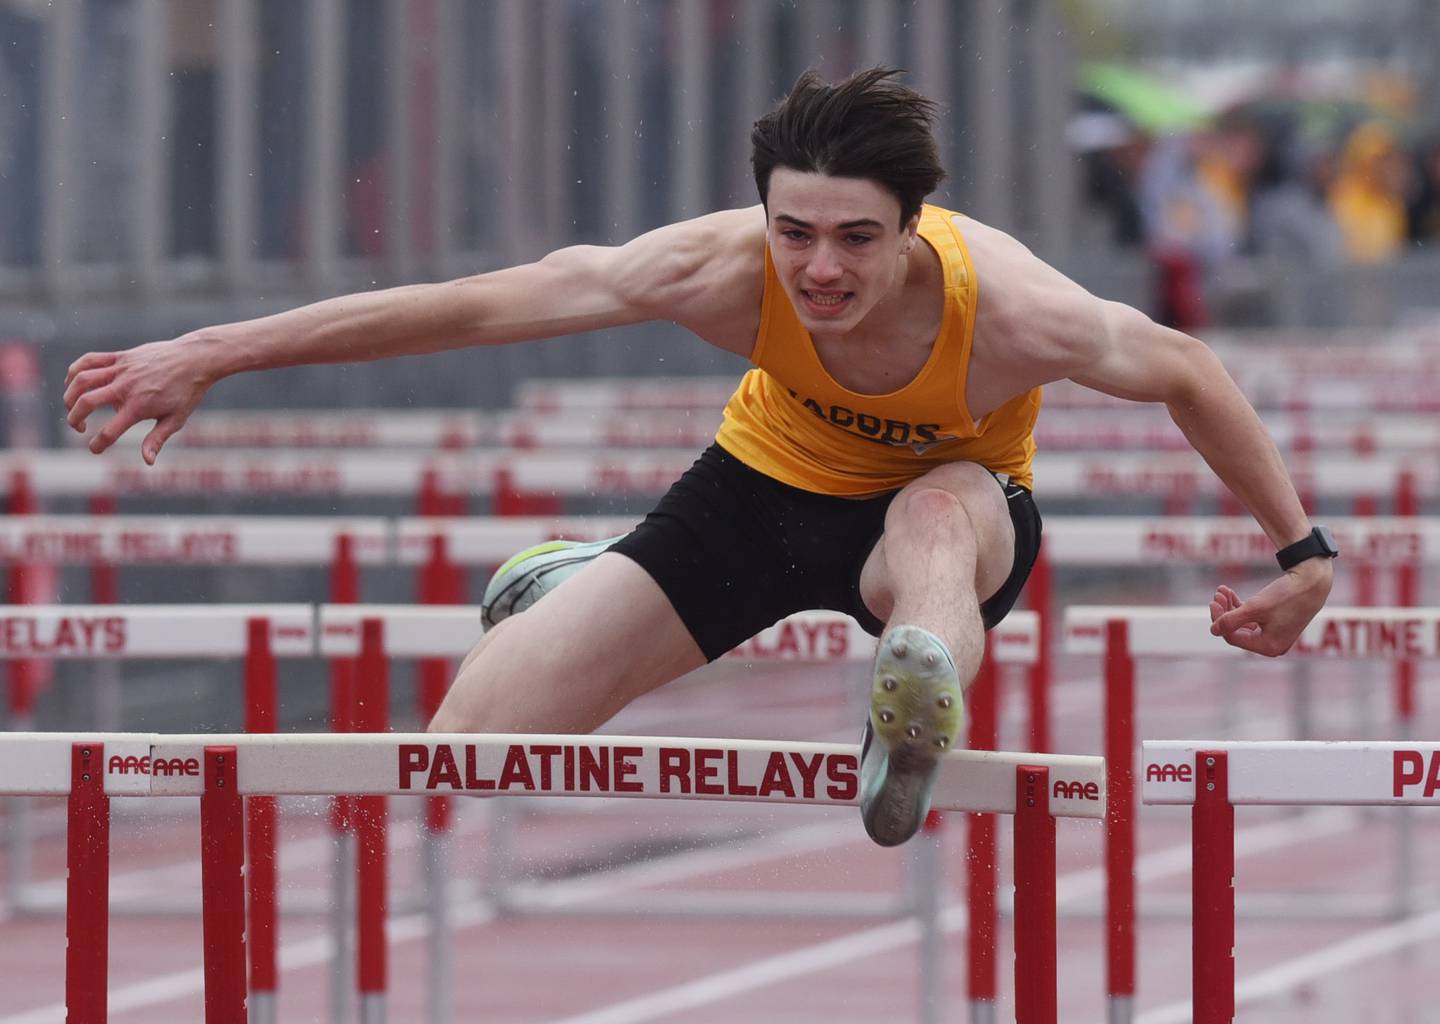 Joe Lewnard/jlewnard@dailyherald.com
Jacobs’ Devan McTague clears the final hurdle in the 110-meter hurdles during the Palatine track and field relays in Palatine Saturday.